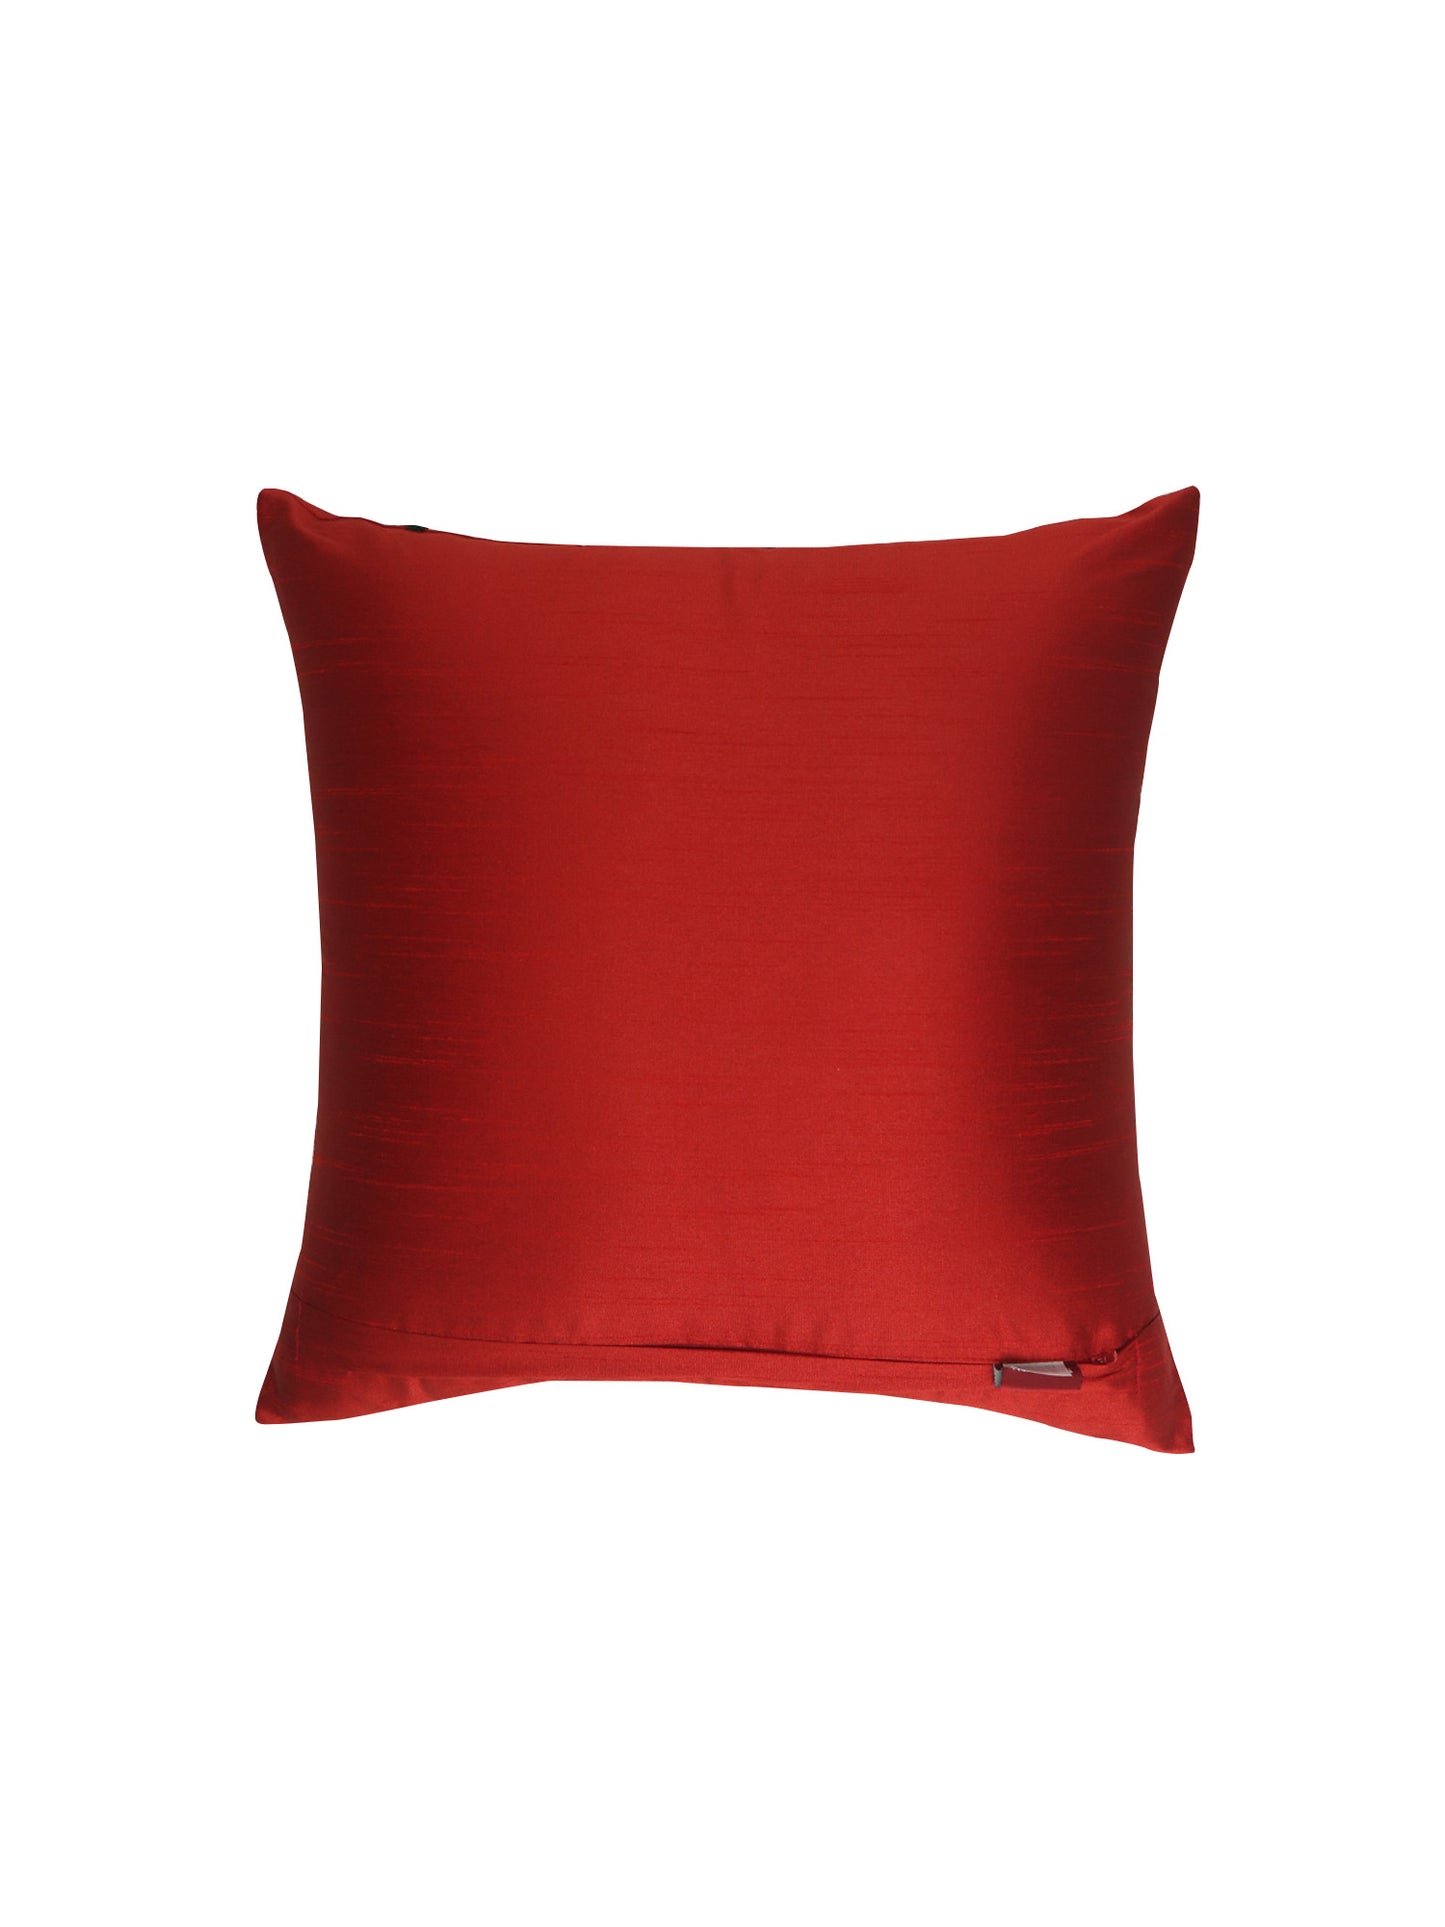 Embroidered Cushion Cover Cotton Blend Red Green - 16" x 16"